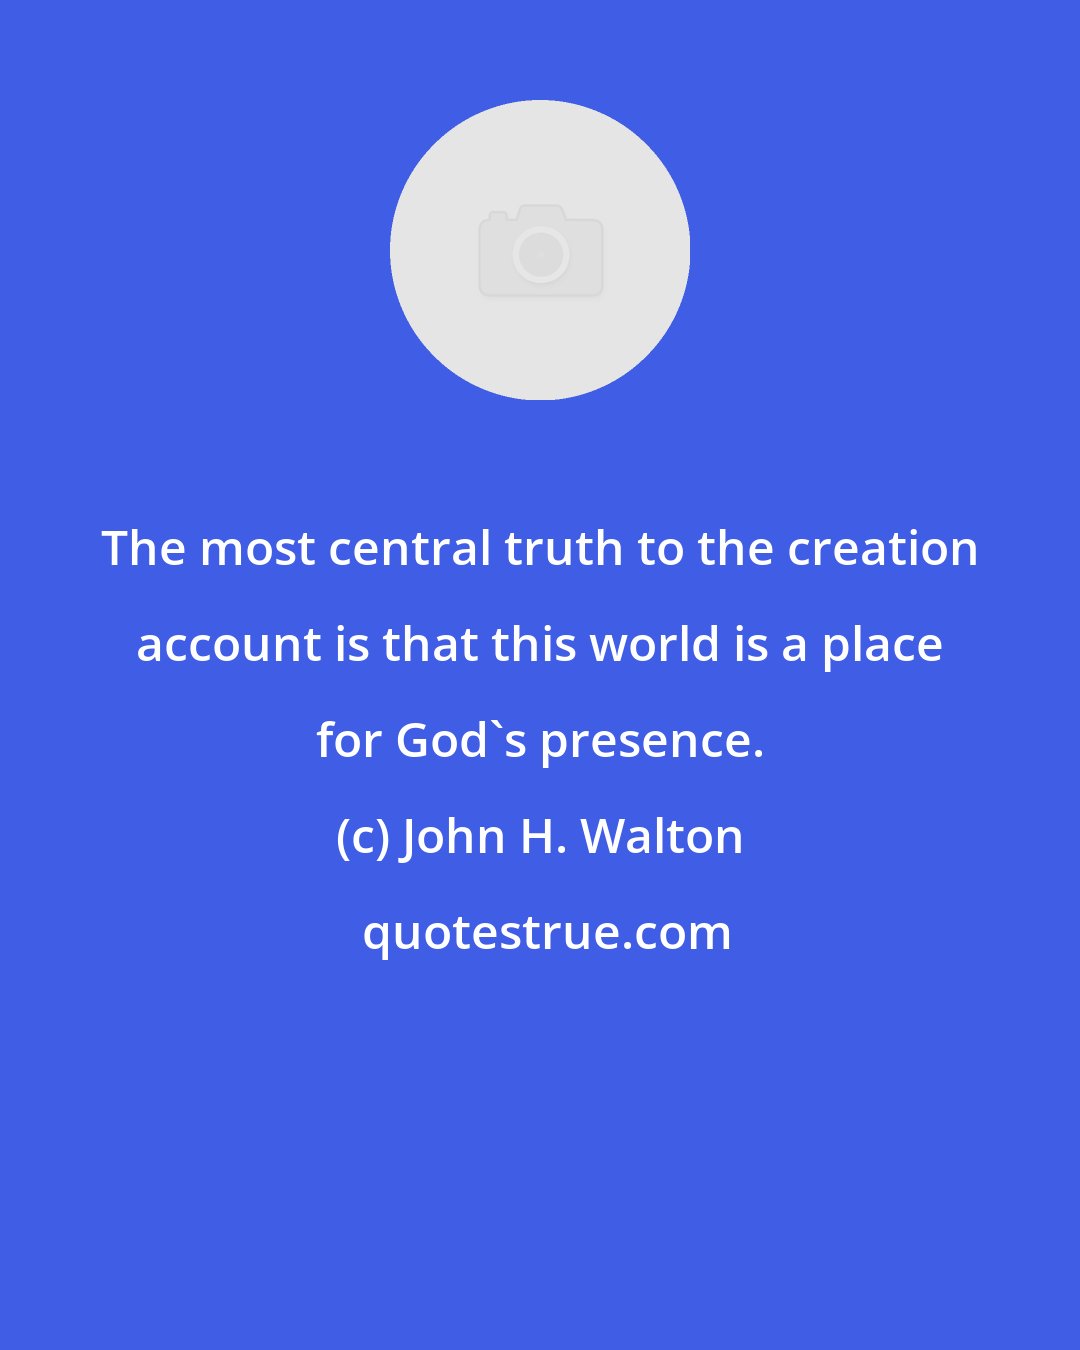 John H. Walton: The most central truth to the creation account is that this world is a place for God's presence.